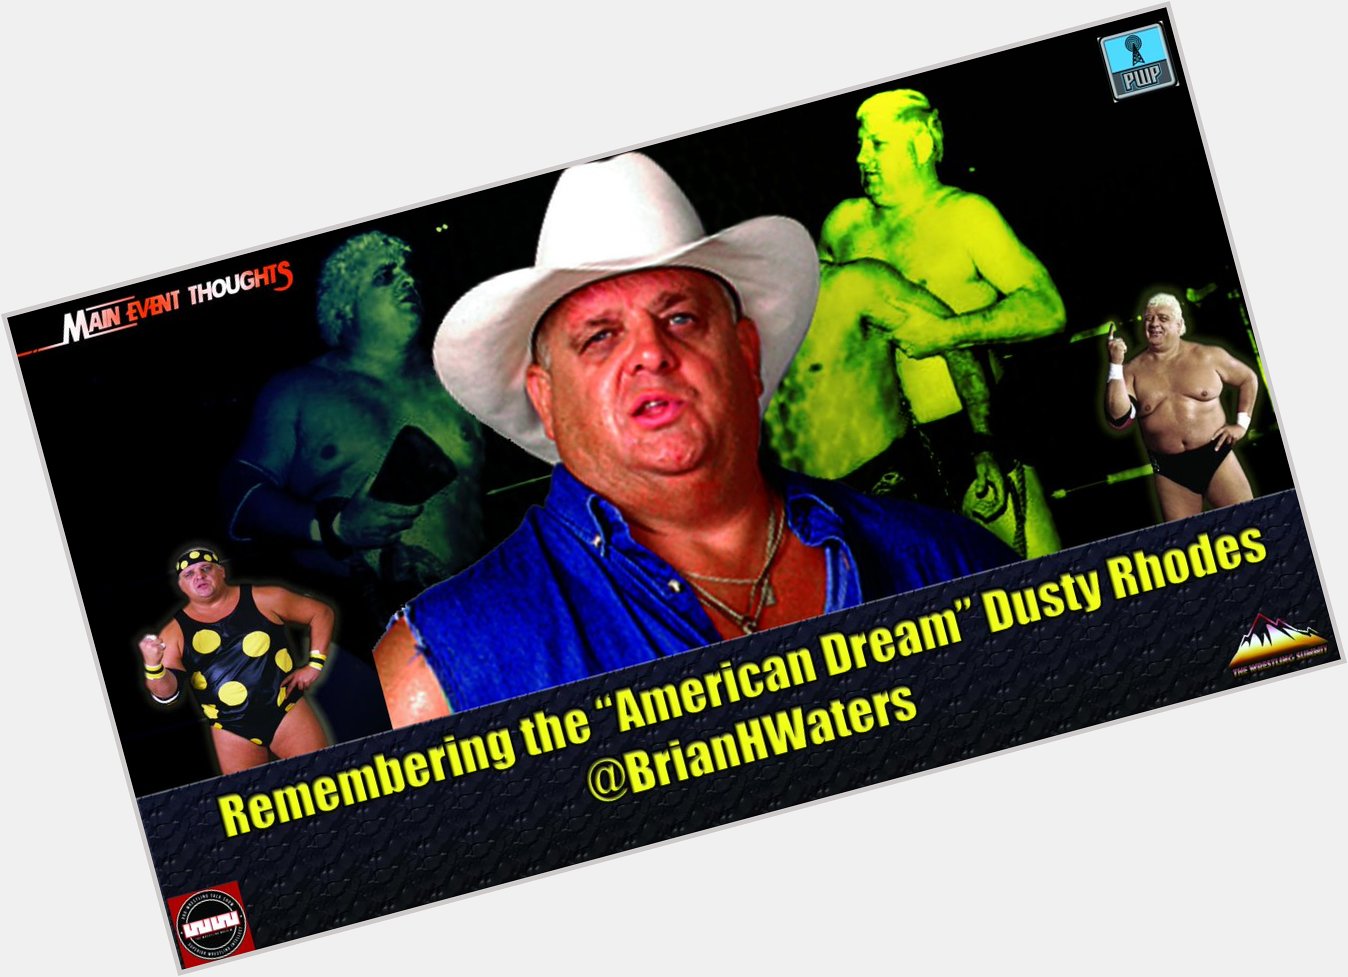 Happy Birthday to the one and only American Dream Dusty Rhodes. 